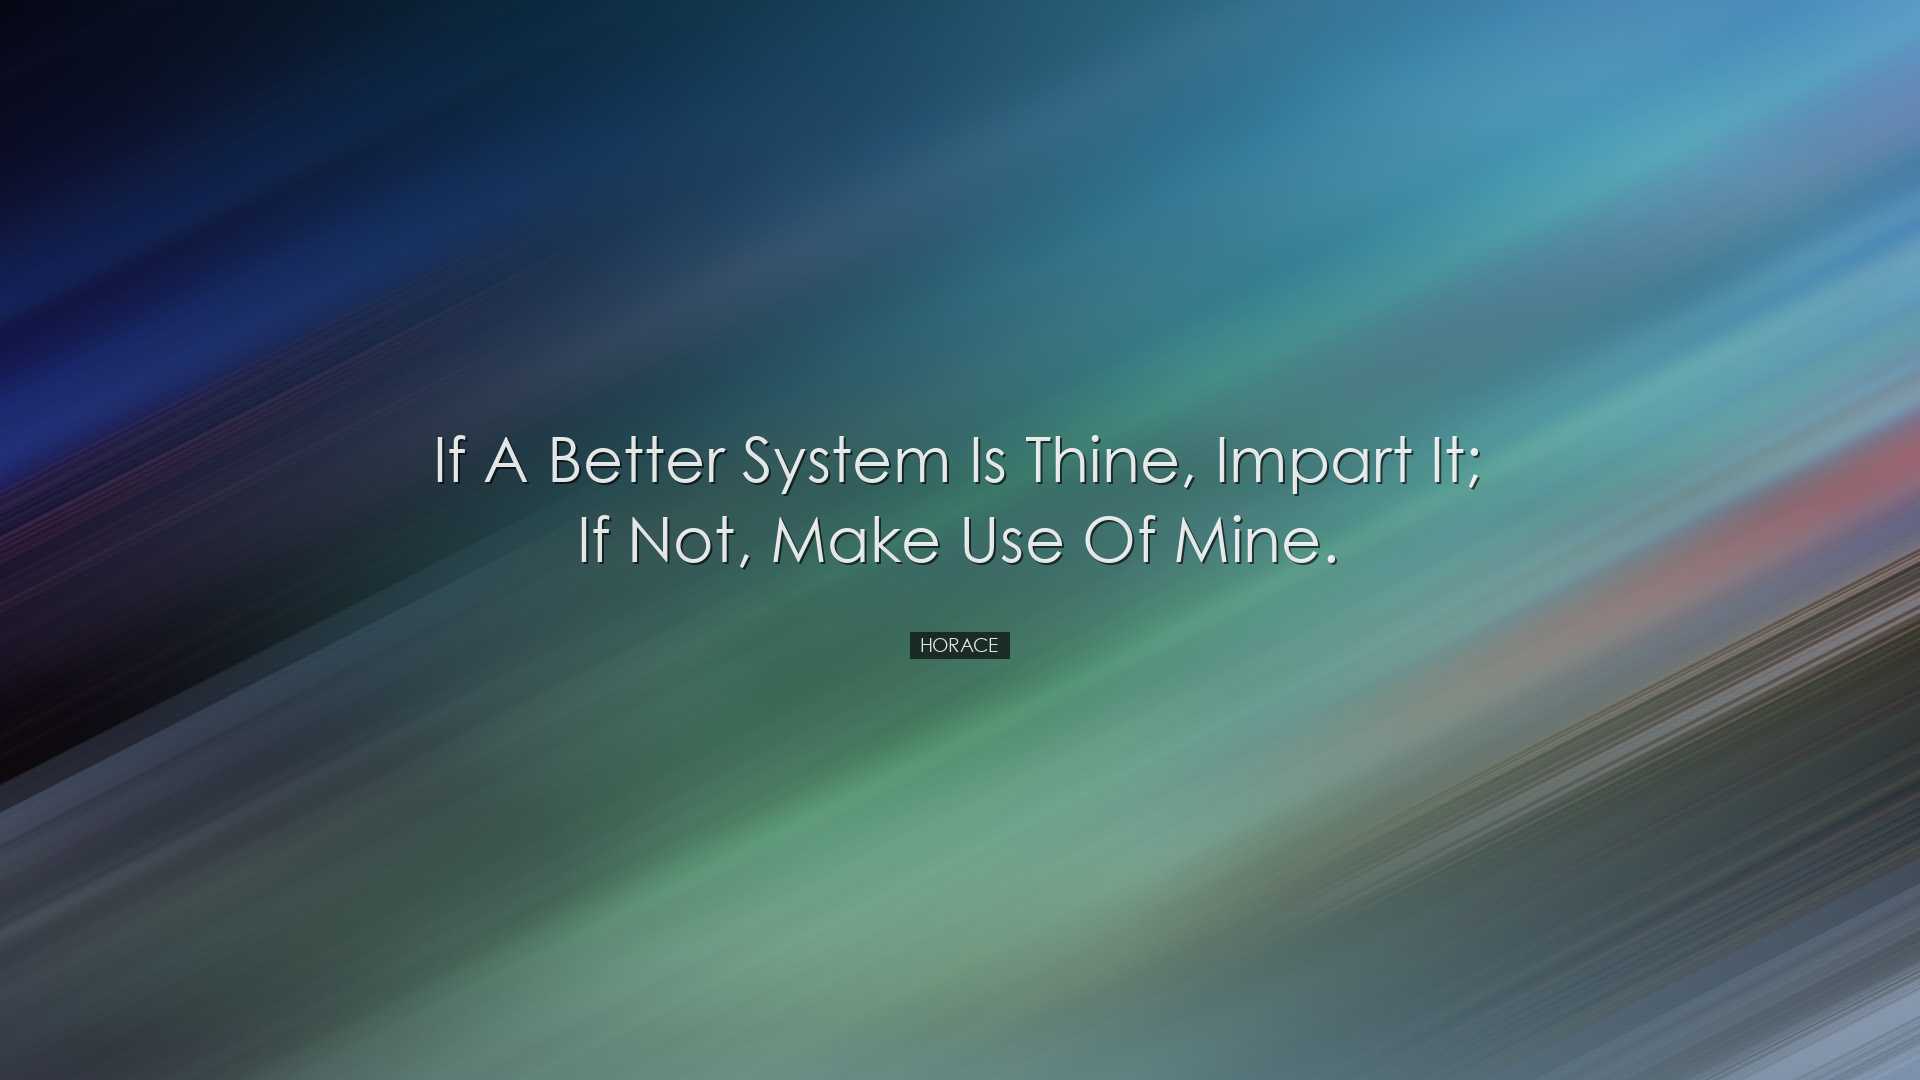 If a better system is thine, impart it; if not, make use of mine.